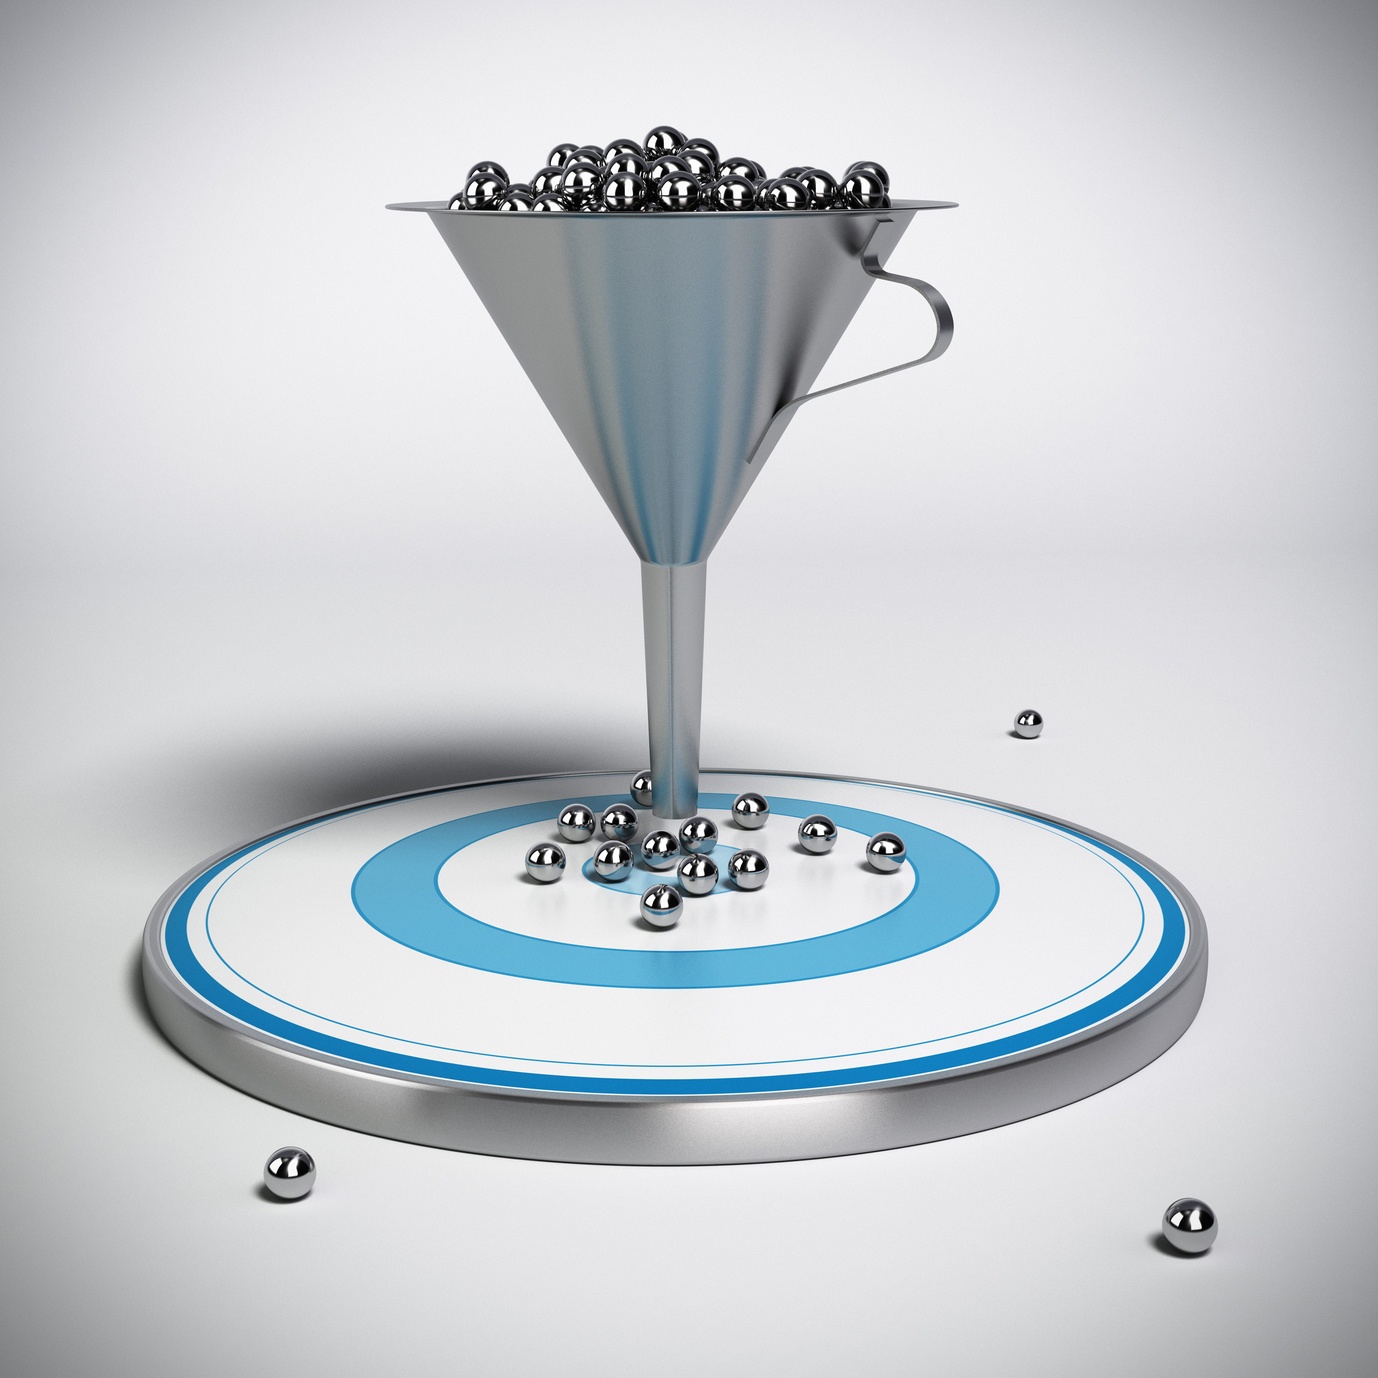 Focus Content on Filling the Sales Funnel